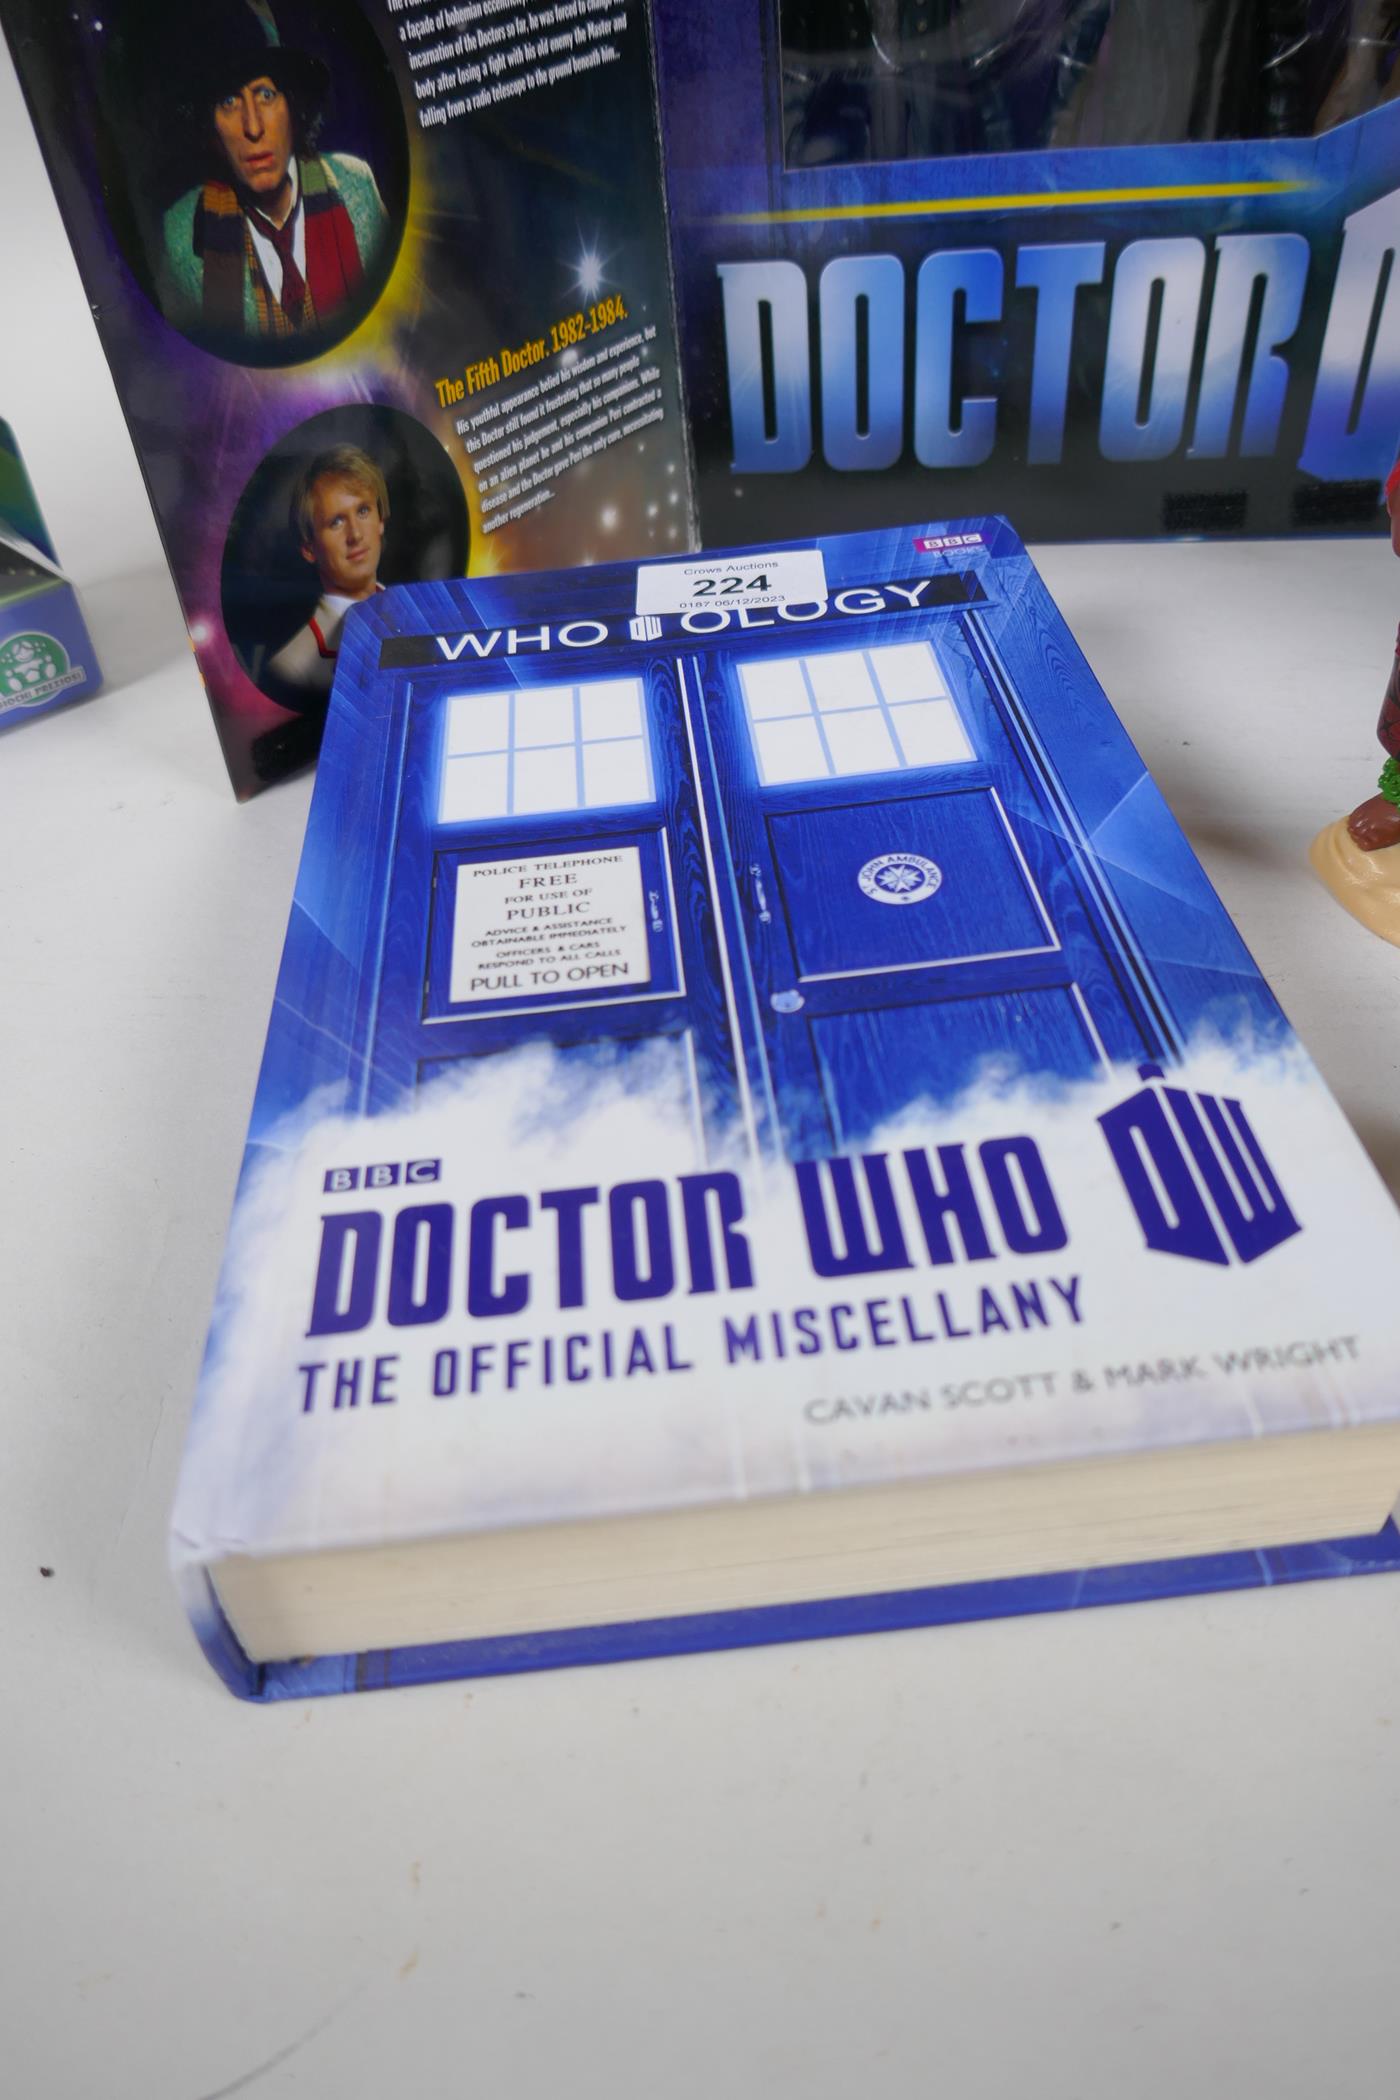 Dr Who Eleven Doctors figure set, Who-ology book, 13th Doctor adventure doll, Ben 10 omni-naut- - Image 6 of 6